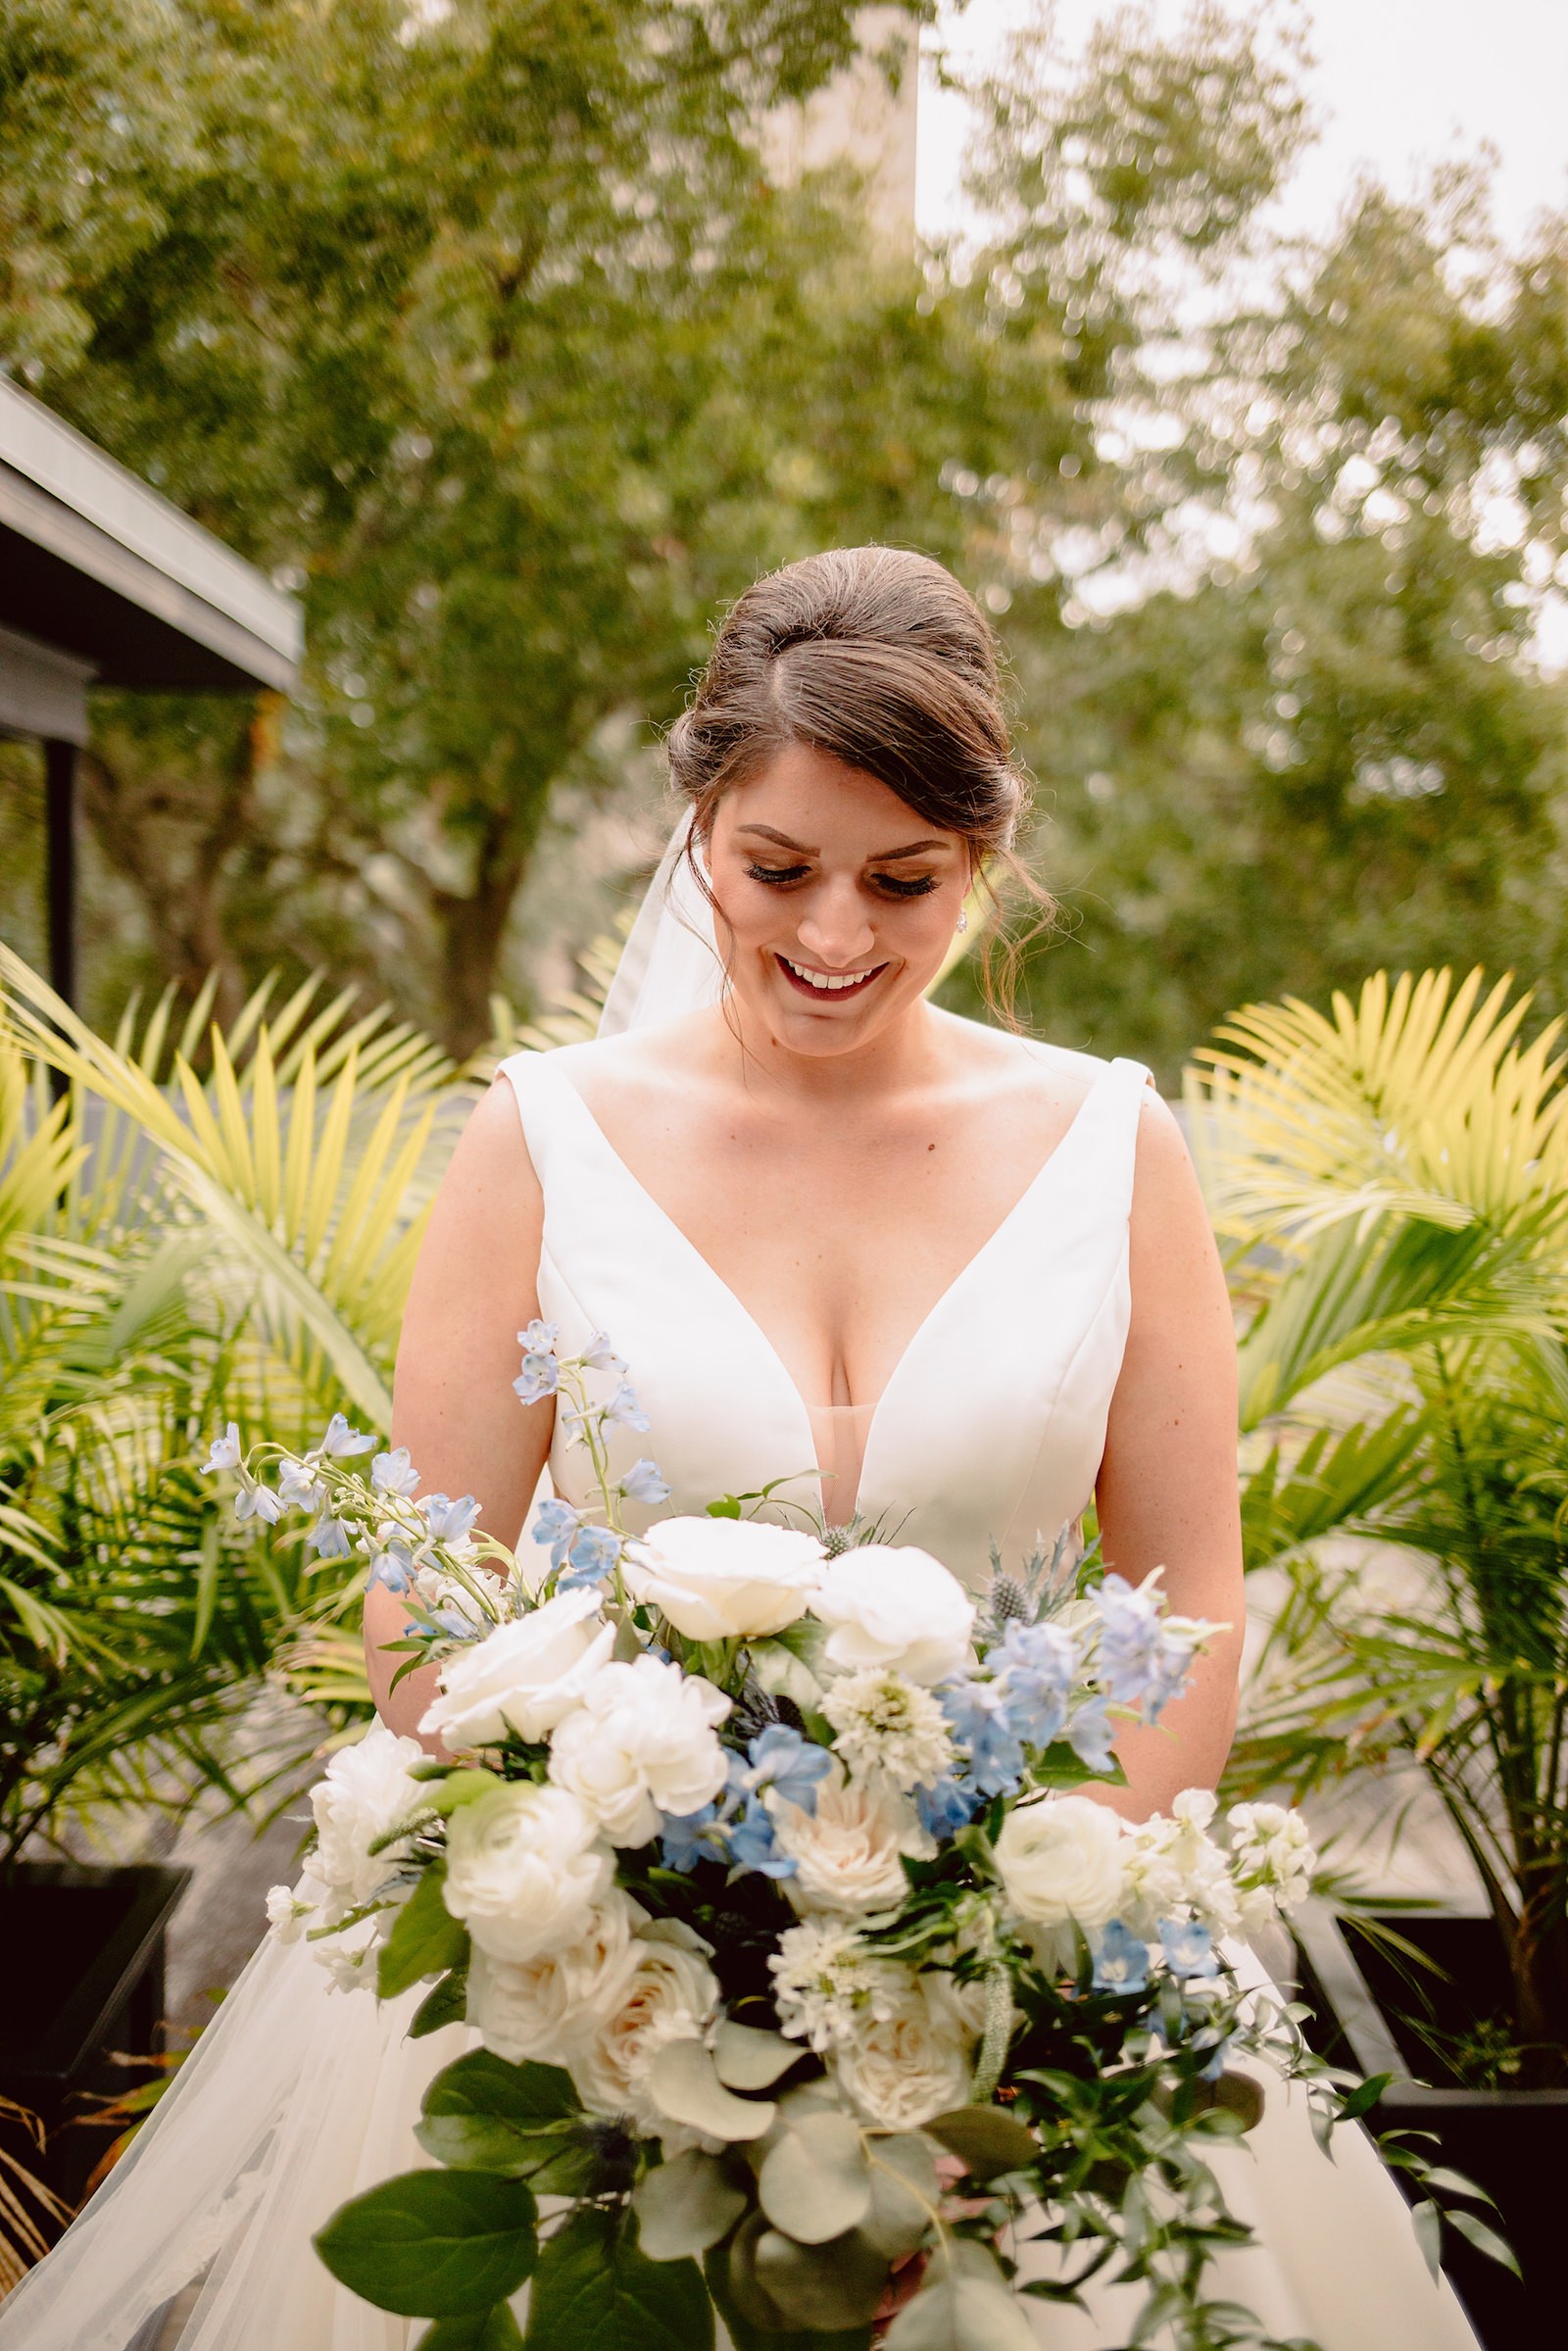 Bride with White and Dusty Blue Wedding Bouquet Up Close Portrait | Tampa Hair and Makeup Artist Femme Akoi